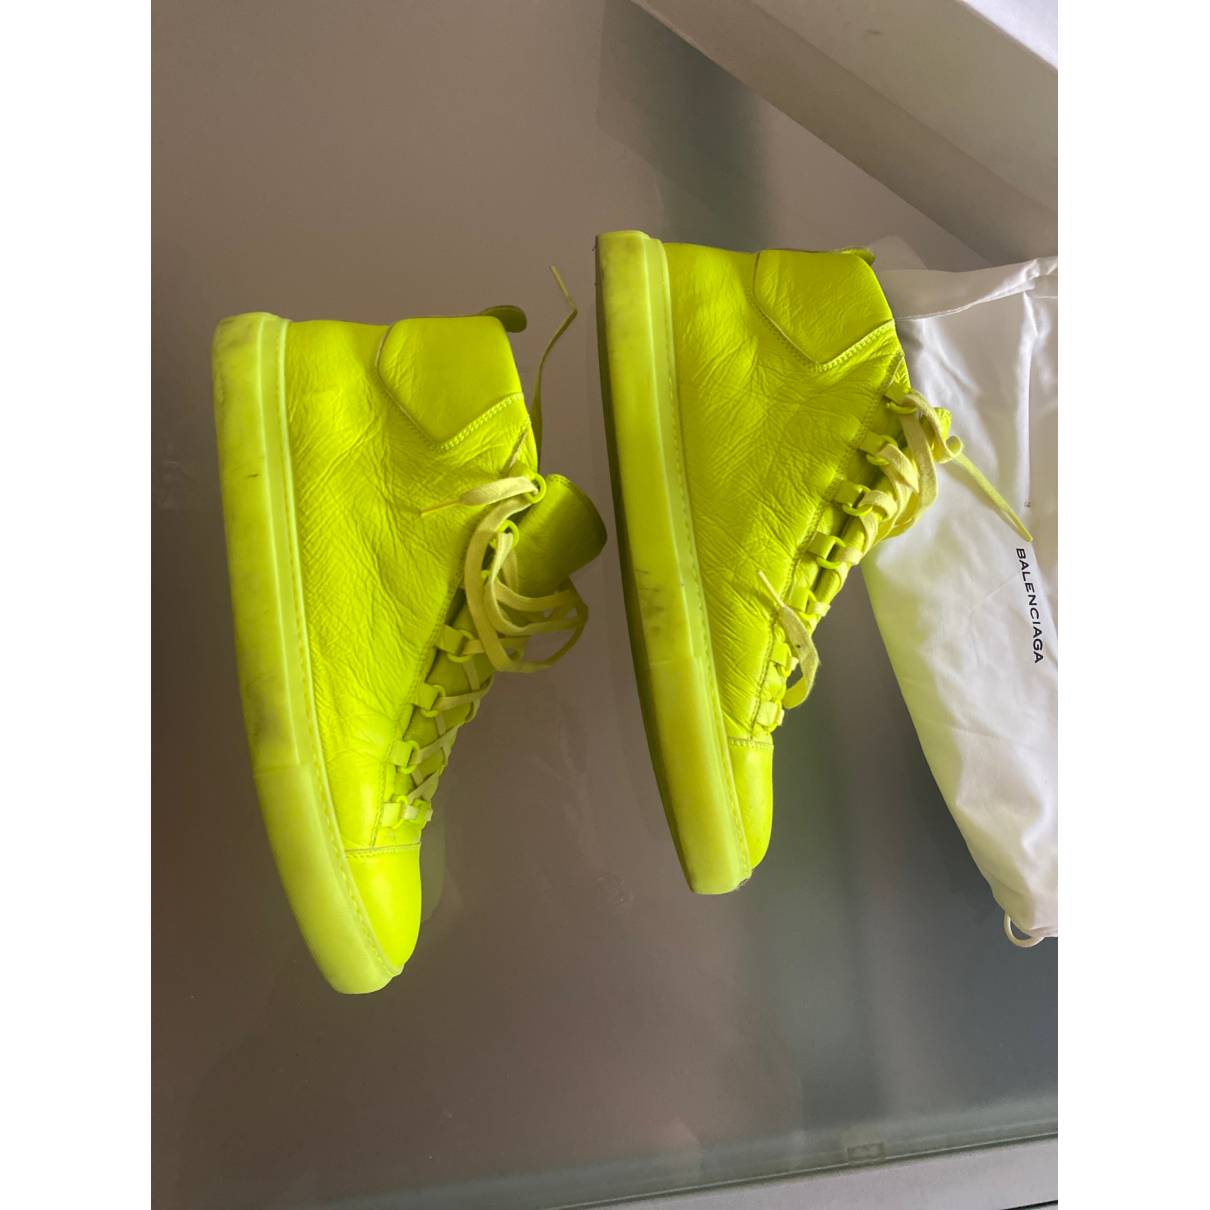 Cyclops tilbagebetaling selvbiografi Arena leather high trainers Balenciaga Yellow size 45 EU in Leather -  25751584